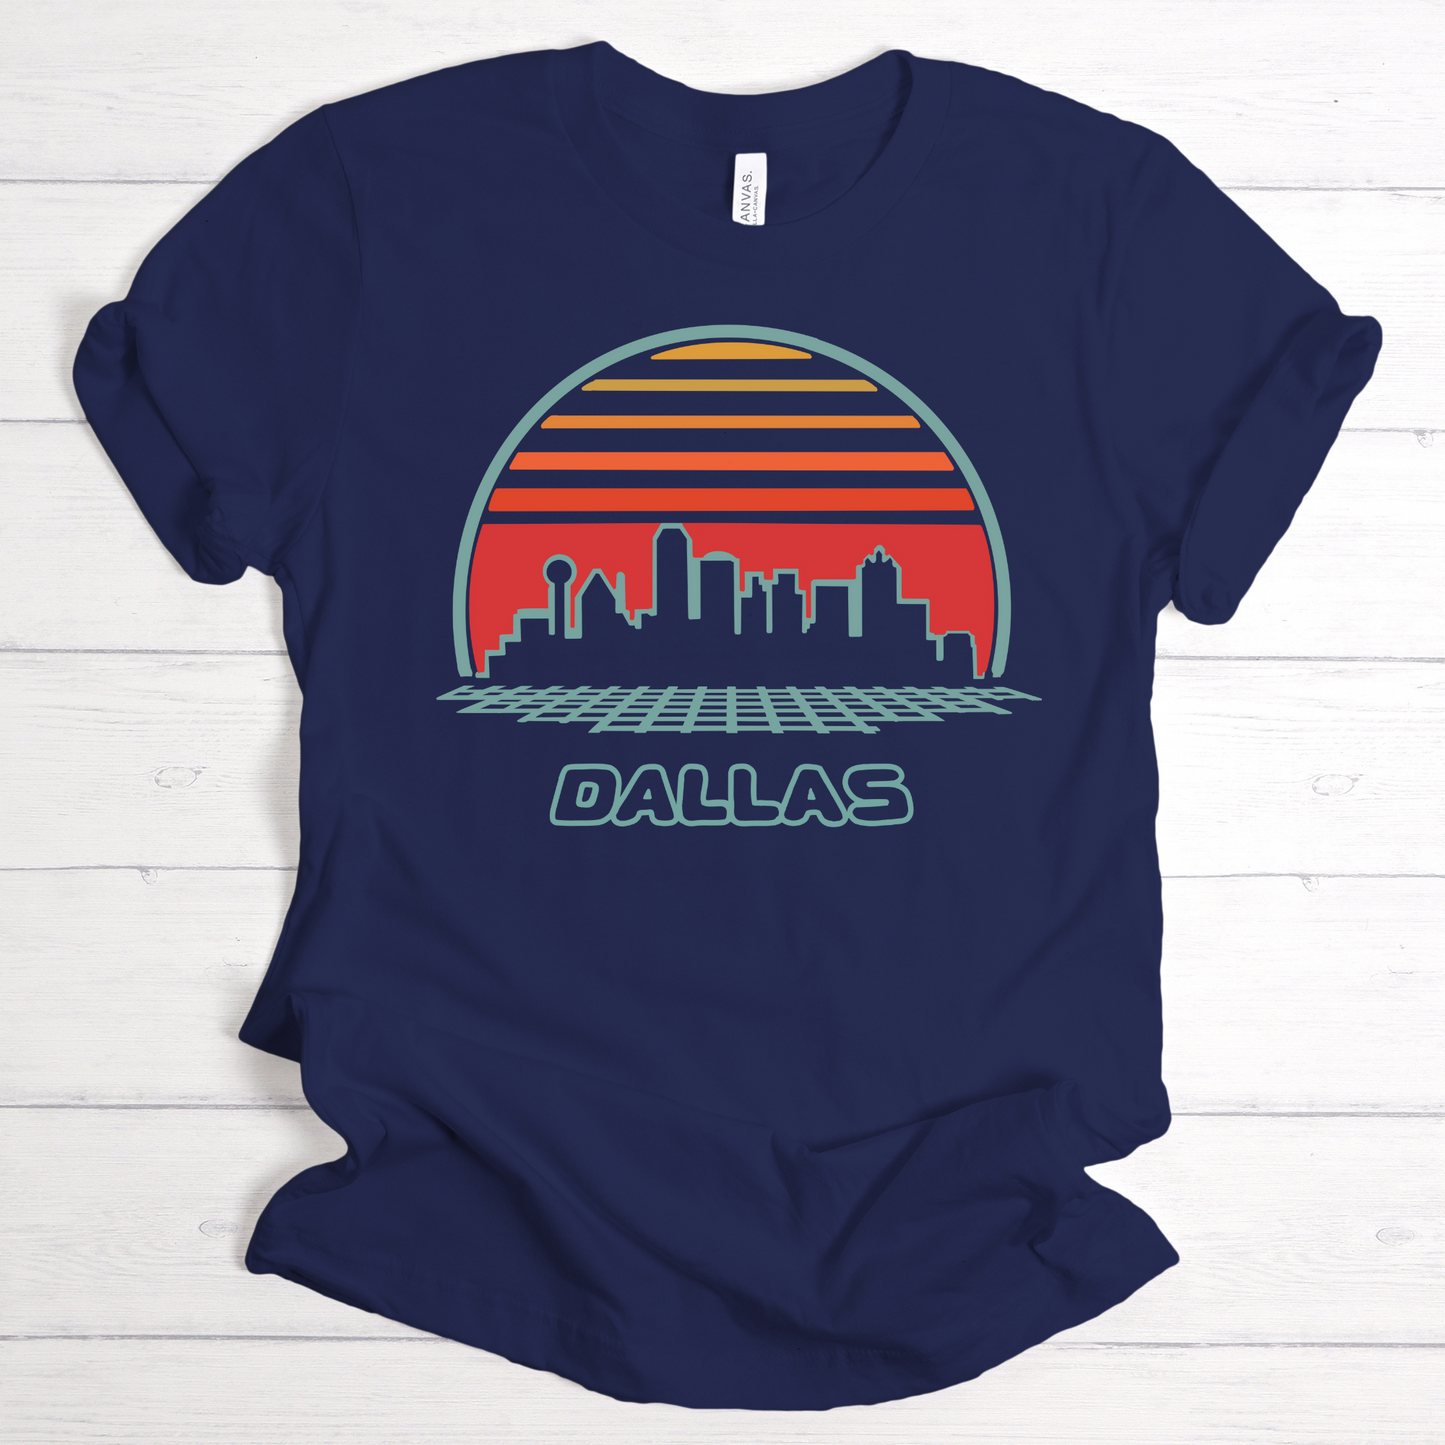 Dallas Downtown Blue and Orange Logo T-Shirt: Embrace City Vibes with this Stylish Tee - Perfect Blend of Dallas Pride and Vibrant Urban Aesthetics